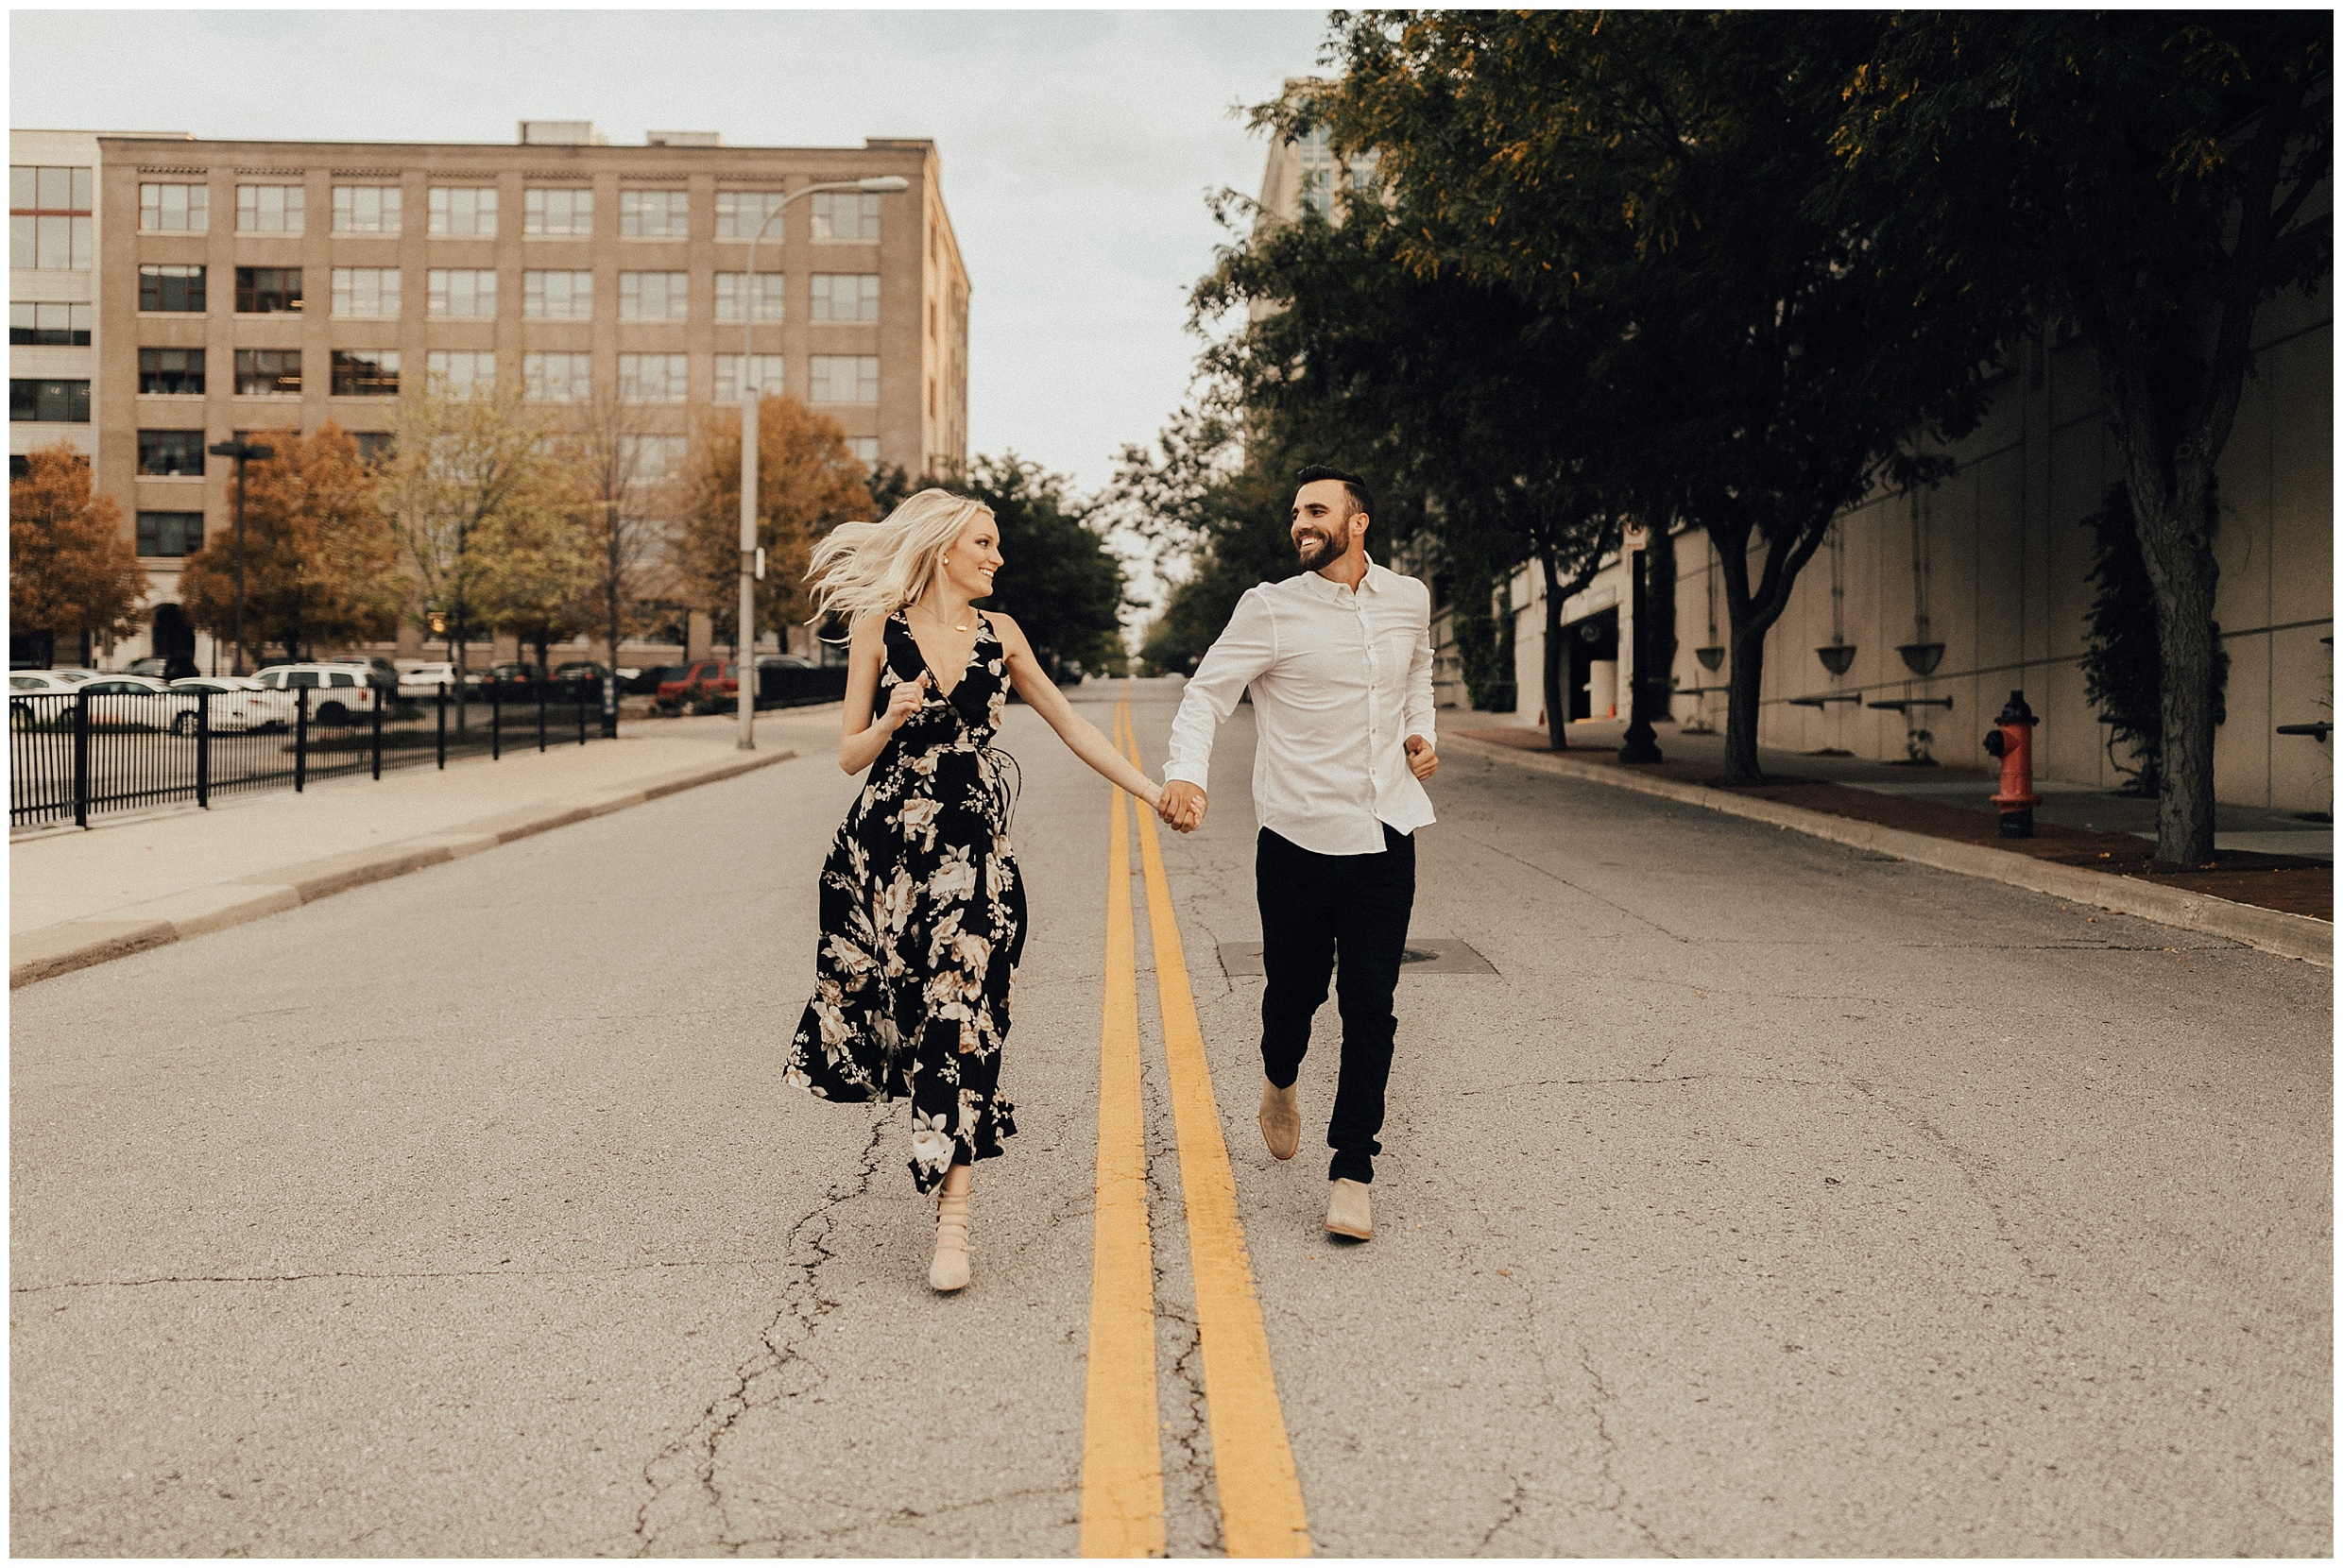 Engagement photos, what to wear for engagement session, save the date, couples posing, engagement photo ideas, Kansas City engagement photos, Kansas city engagement photographer, downtown Kansas City engagement photos, river market engagement photos, downtown Kansas City engagement session, river market engagement session